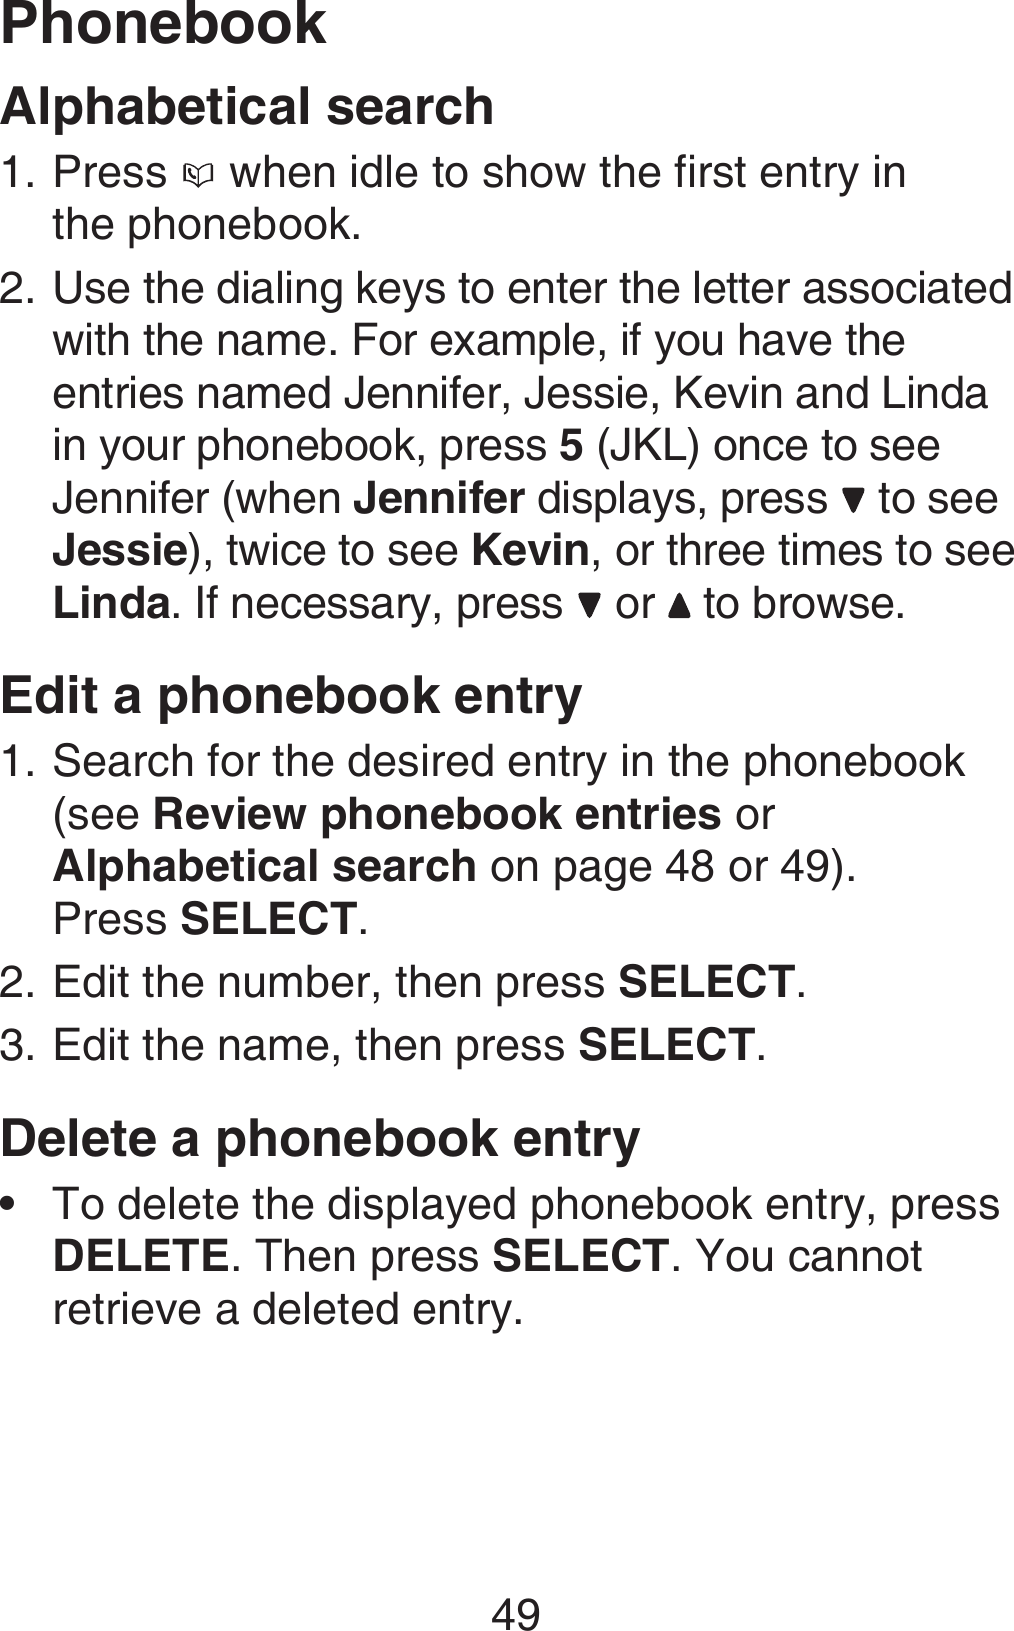 49PhonebookAlphabetical searchPress   when idle to show the first entry in  the phonebook.Use the dialing keys to enter the letter associated with the name. For example, if you have the entries named Jennifer, Jessie, Kevin and Linda in your phonebook, press 5 (JKL) once to see Jennifer (when Jennifer displays, press   to see Jessie), twice to see Kevin, or three times to see Linda. If necessary, press   or   to browse.Edit a phonebook entrySearch for the desired entry in the phonebook (see Review phonebook entries or Alphabetical search on page 48 or 49).  Press SELECT.Edit the number, then press SELECT.Edit the name, then press SELECT.Delete a phonebook entryTo delete the displayed phonebook entry, press DELETE. Then press SELECT. You cannot retrieve a deleted entry.1.2.1.2.3.•